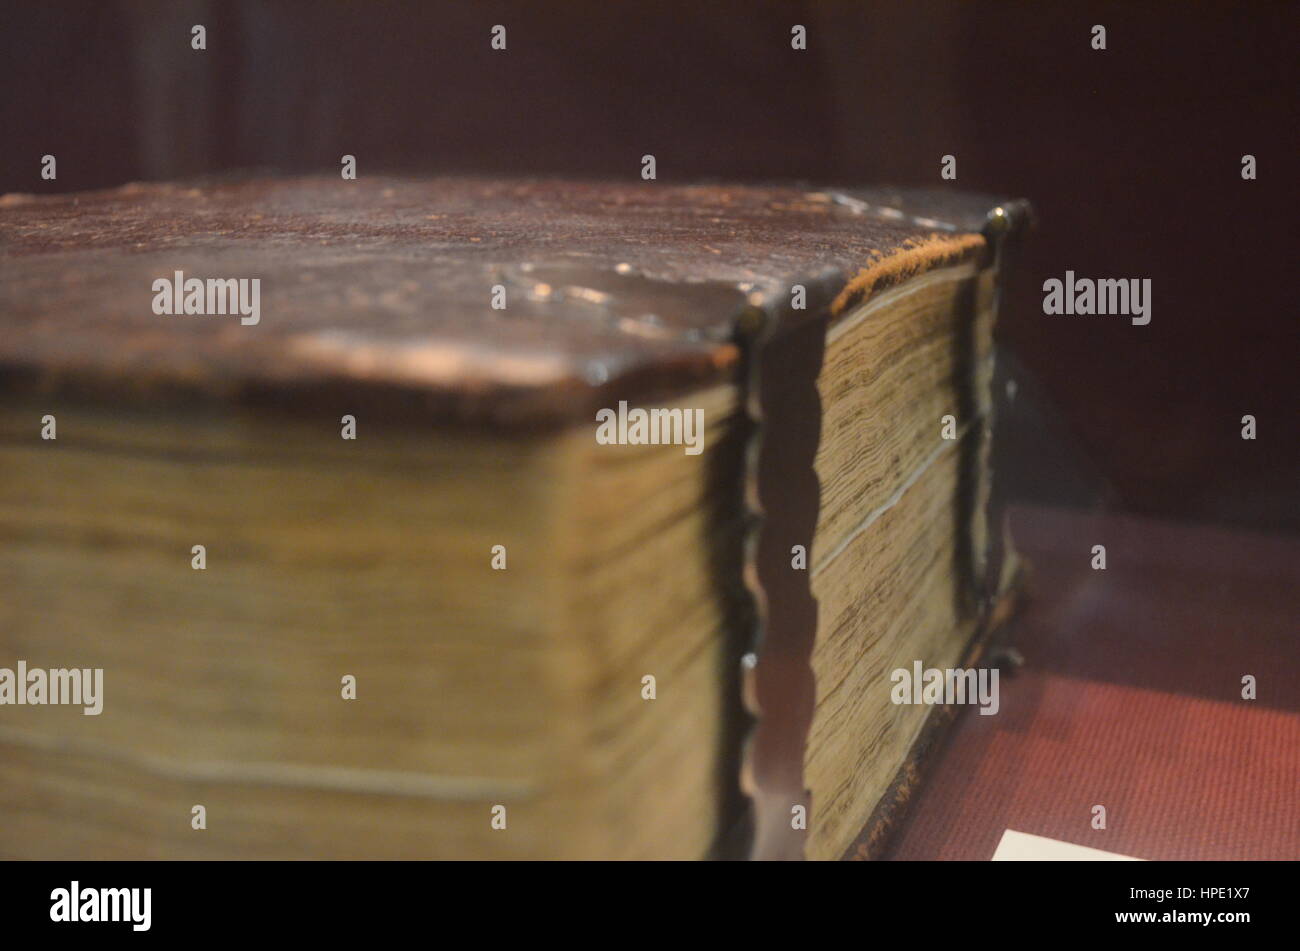 Old Leather Covered Book Stock Photo